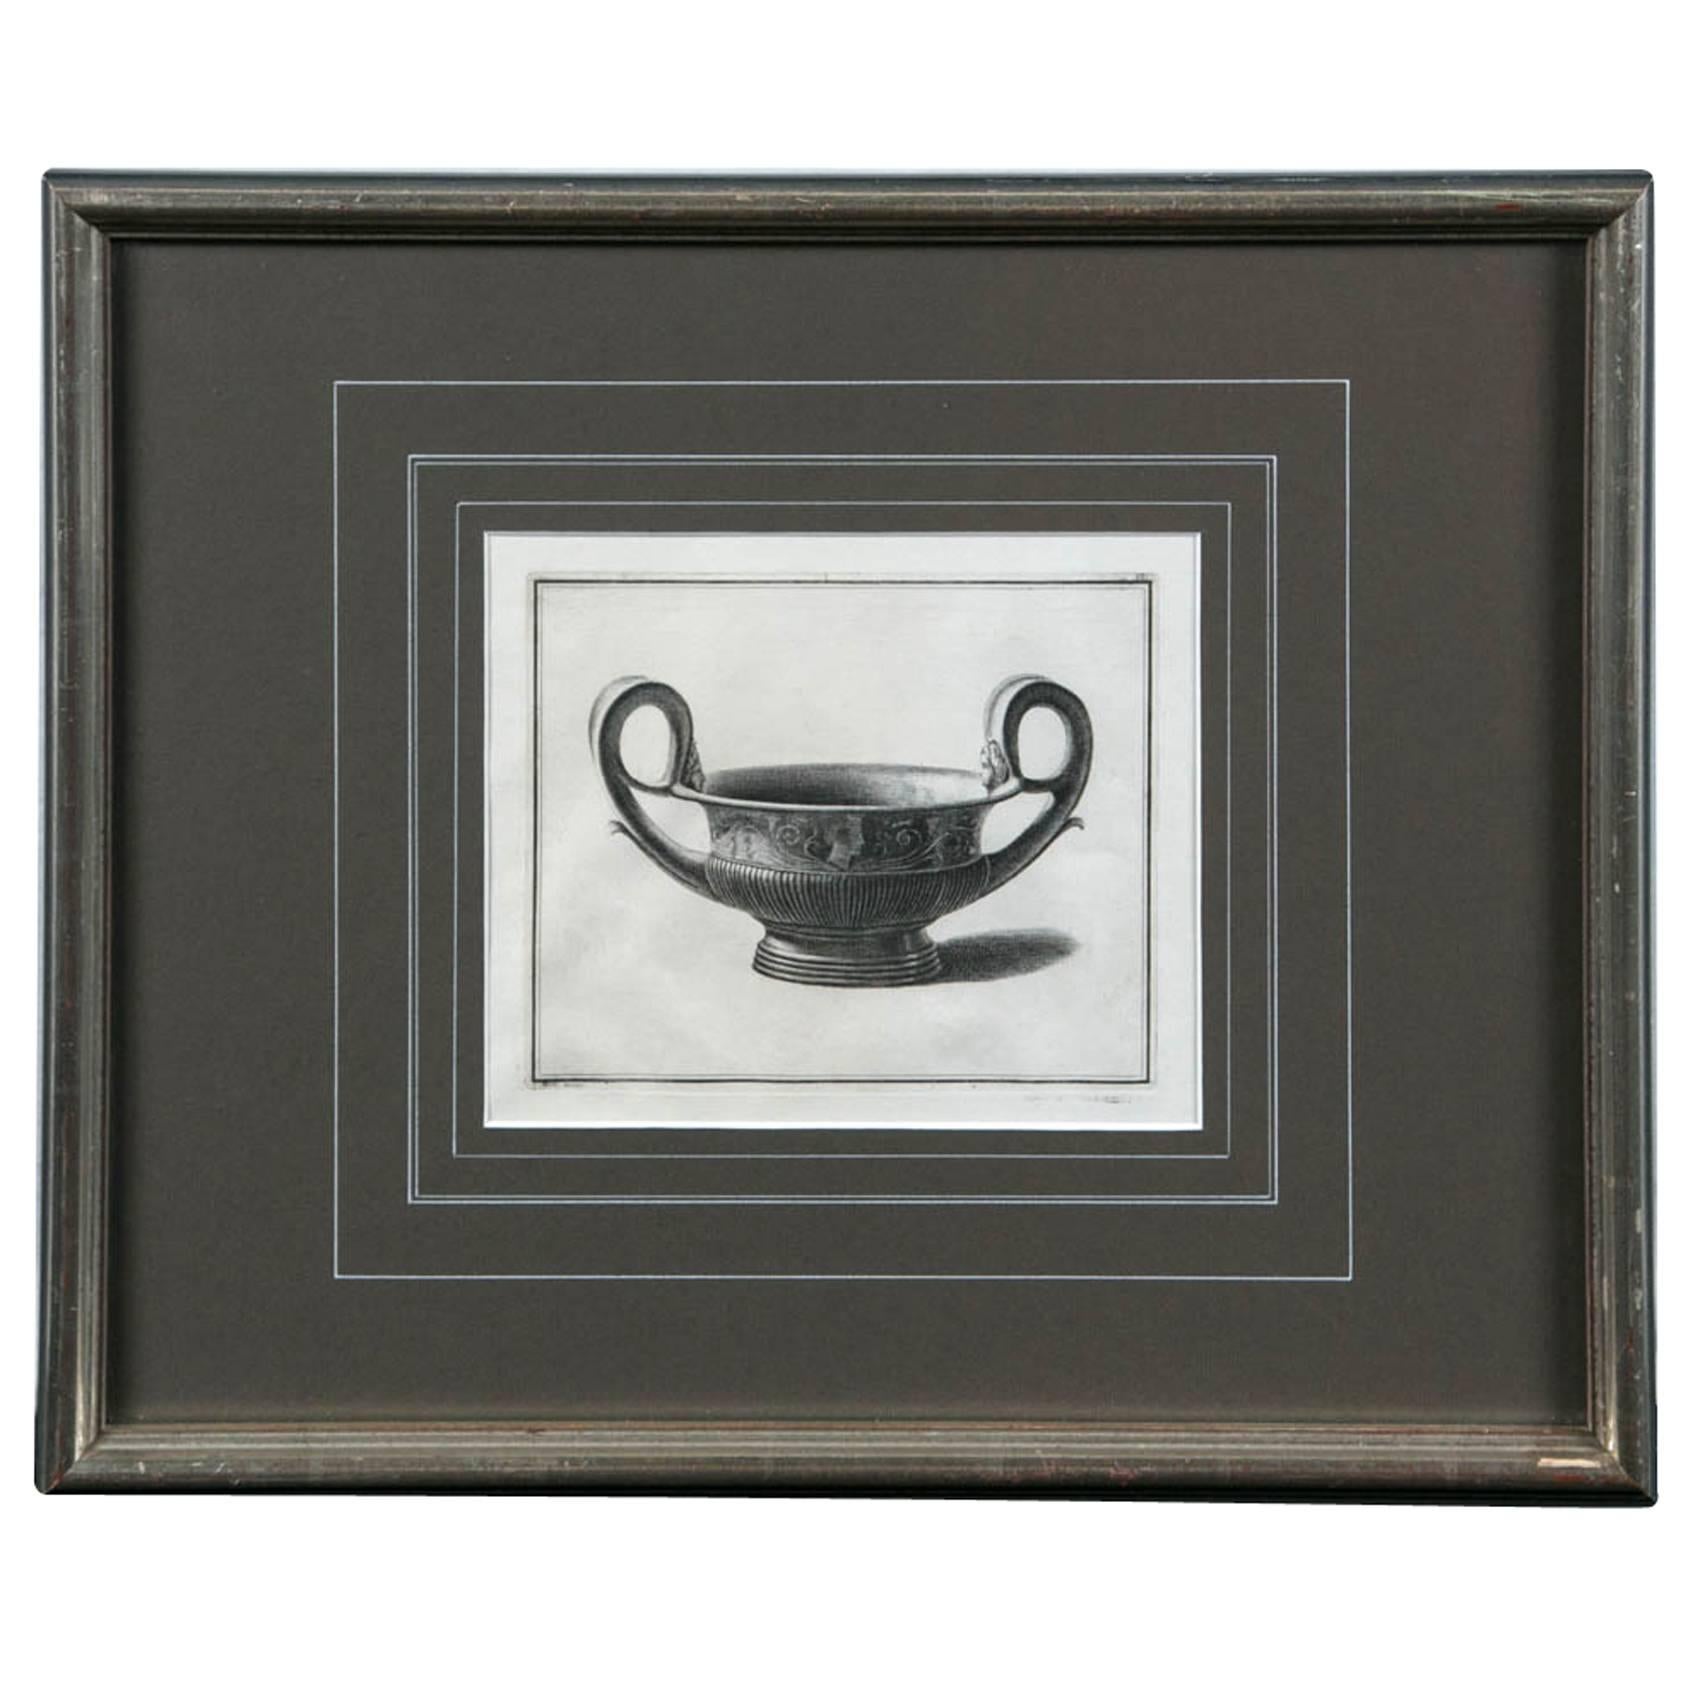 Framed Etching, Neoclassical Vessel, 19th Century